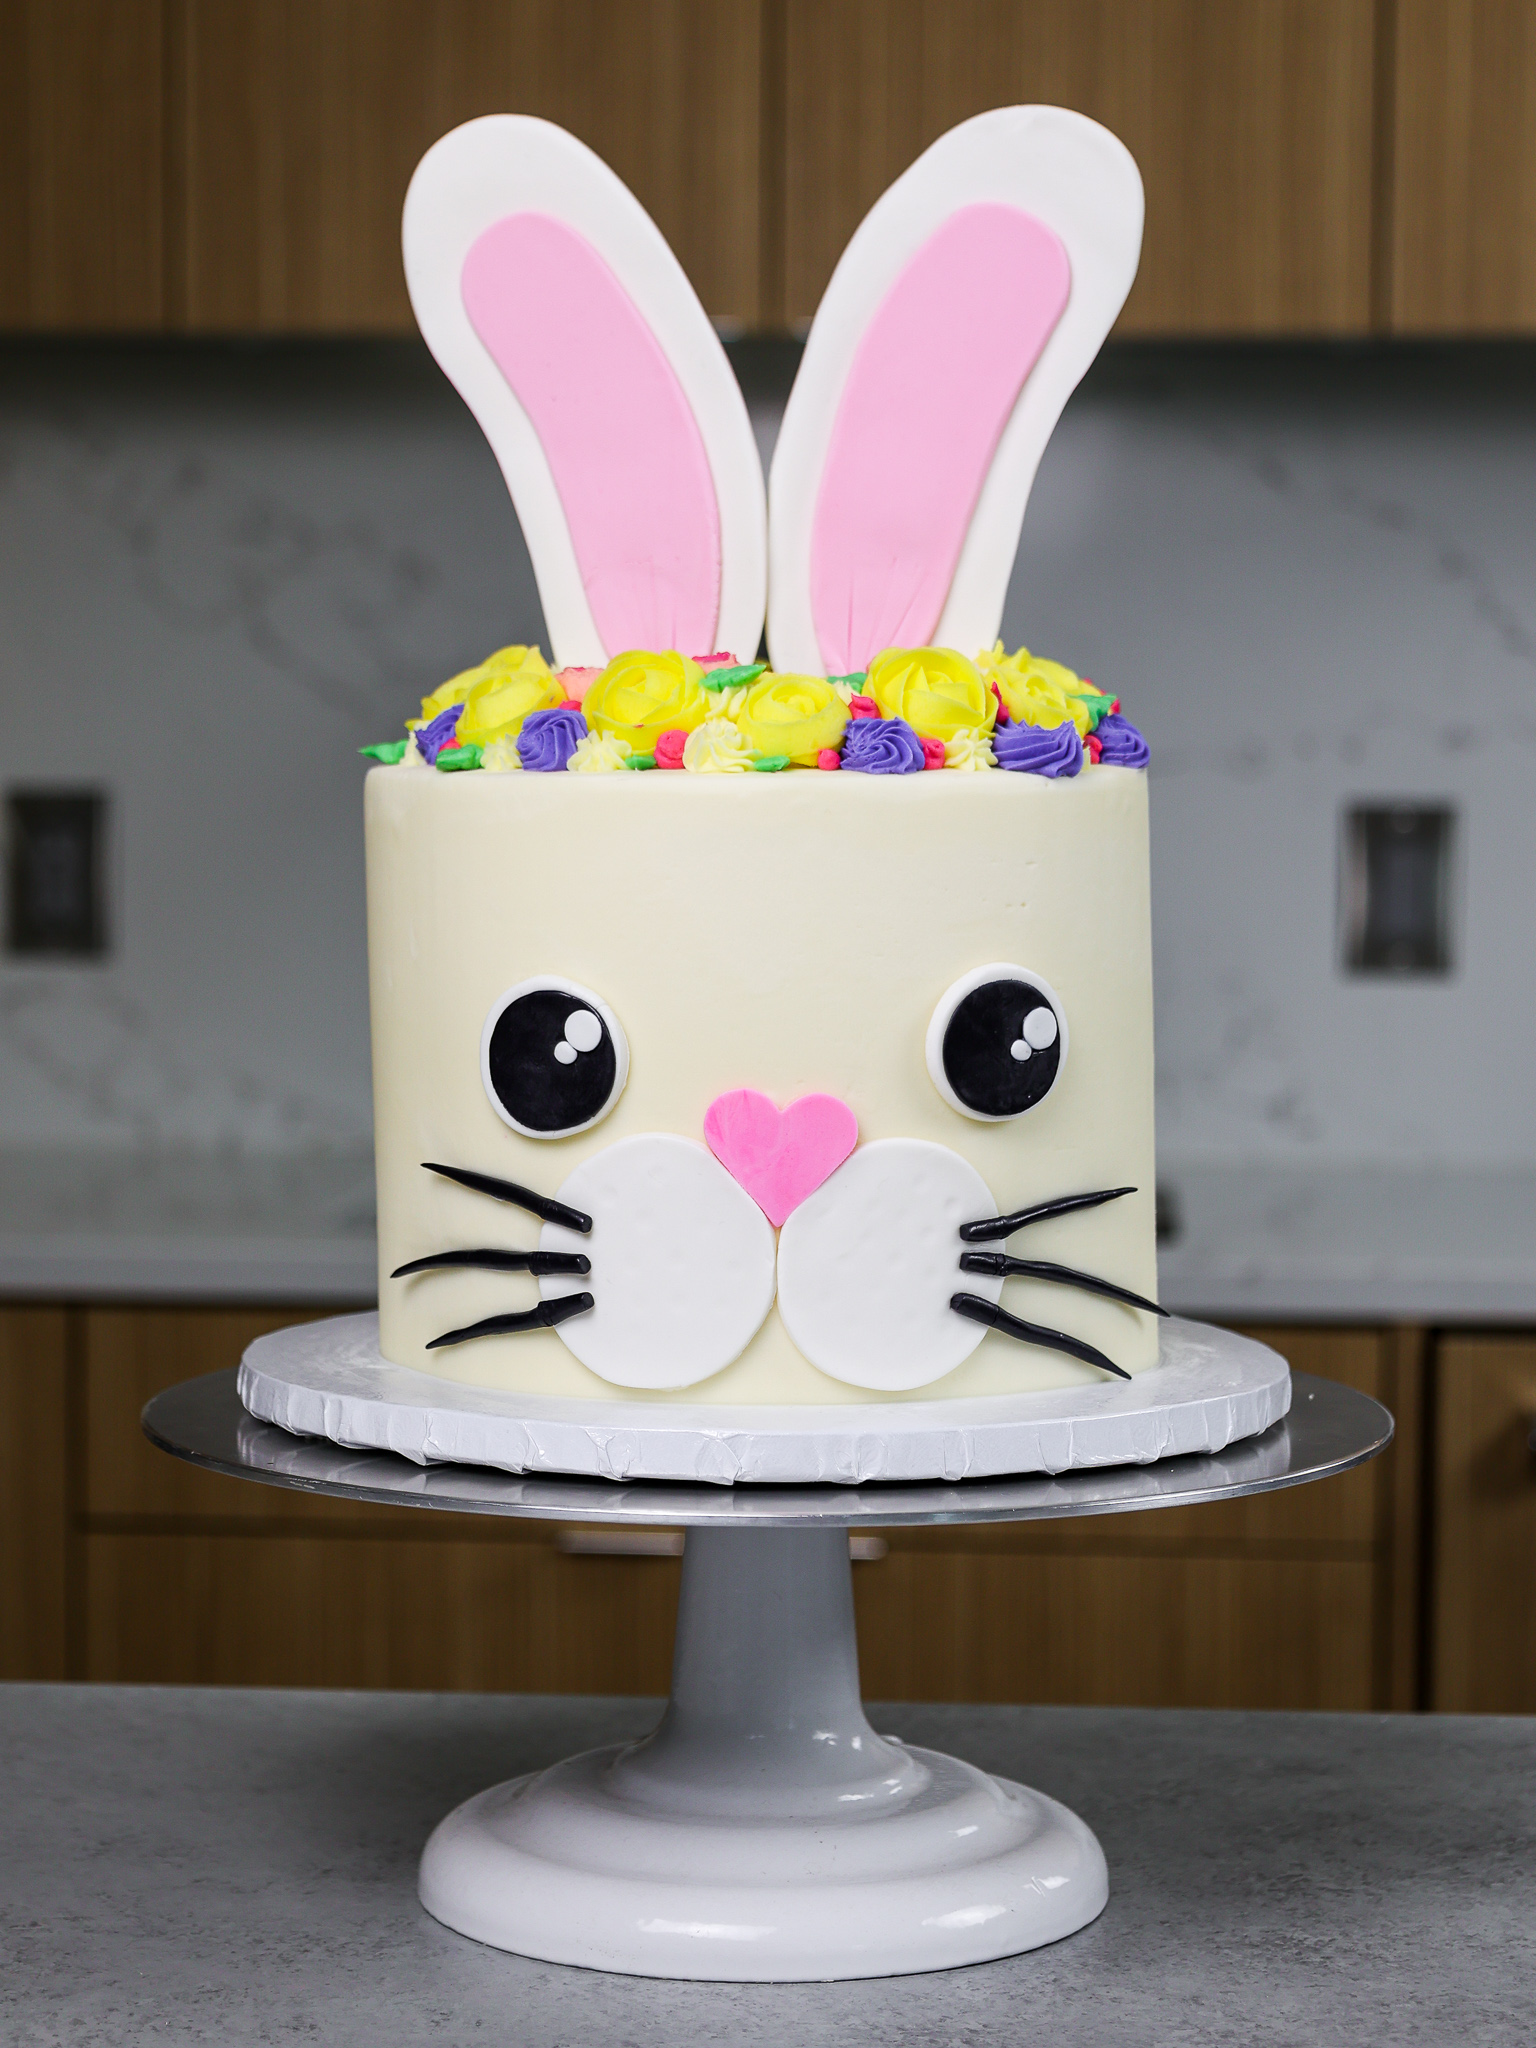 What I Live For: Bunny Rabbit Cake